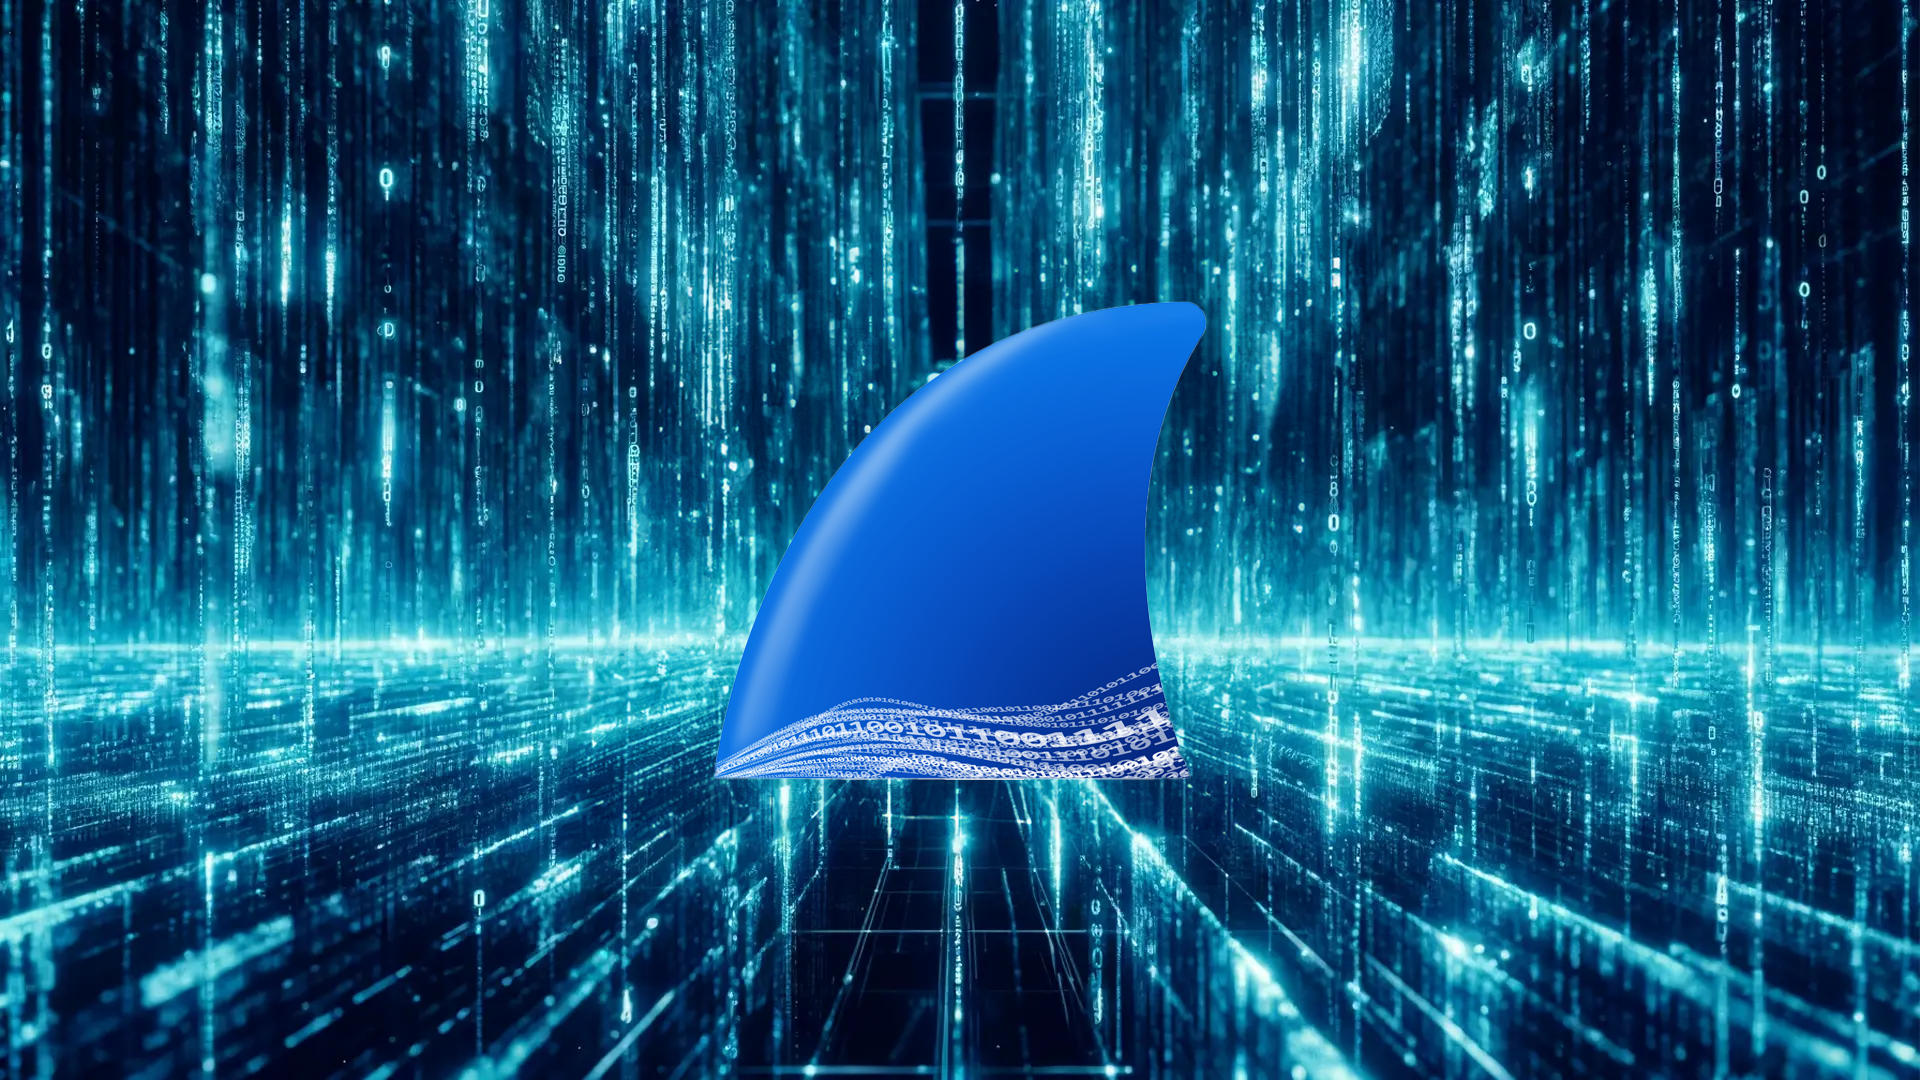 Using WireShark to ensure clear text user details aren't leaked